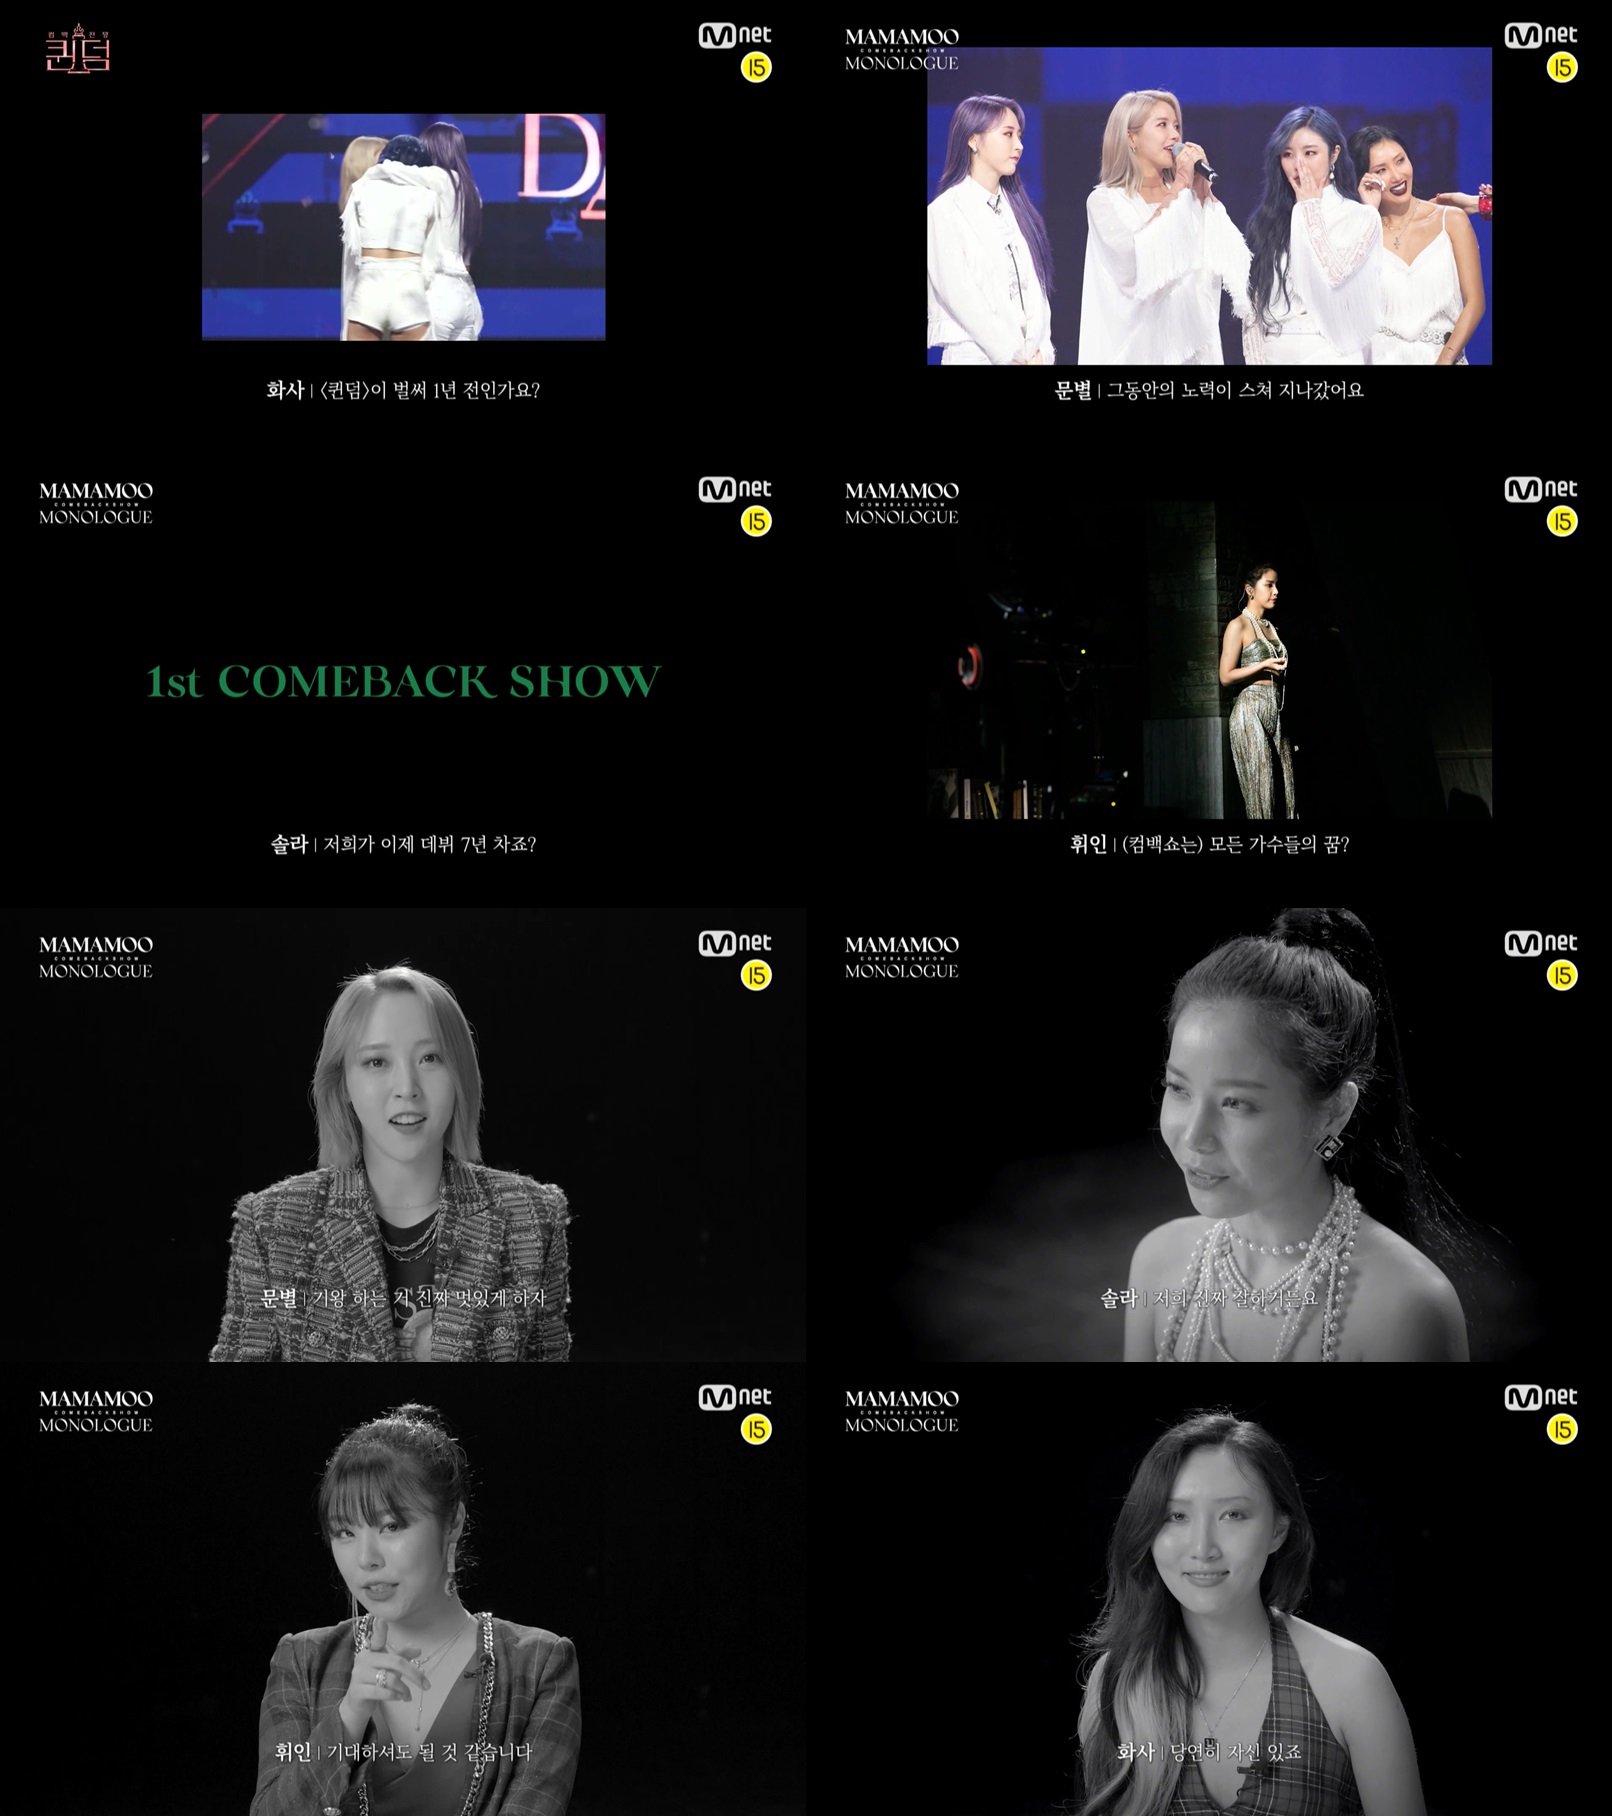 mamamoo-to-have-first-comeback-show-monologue-on-november-3